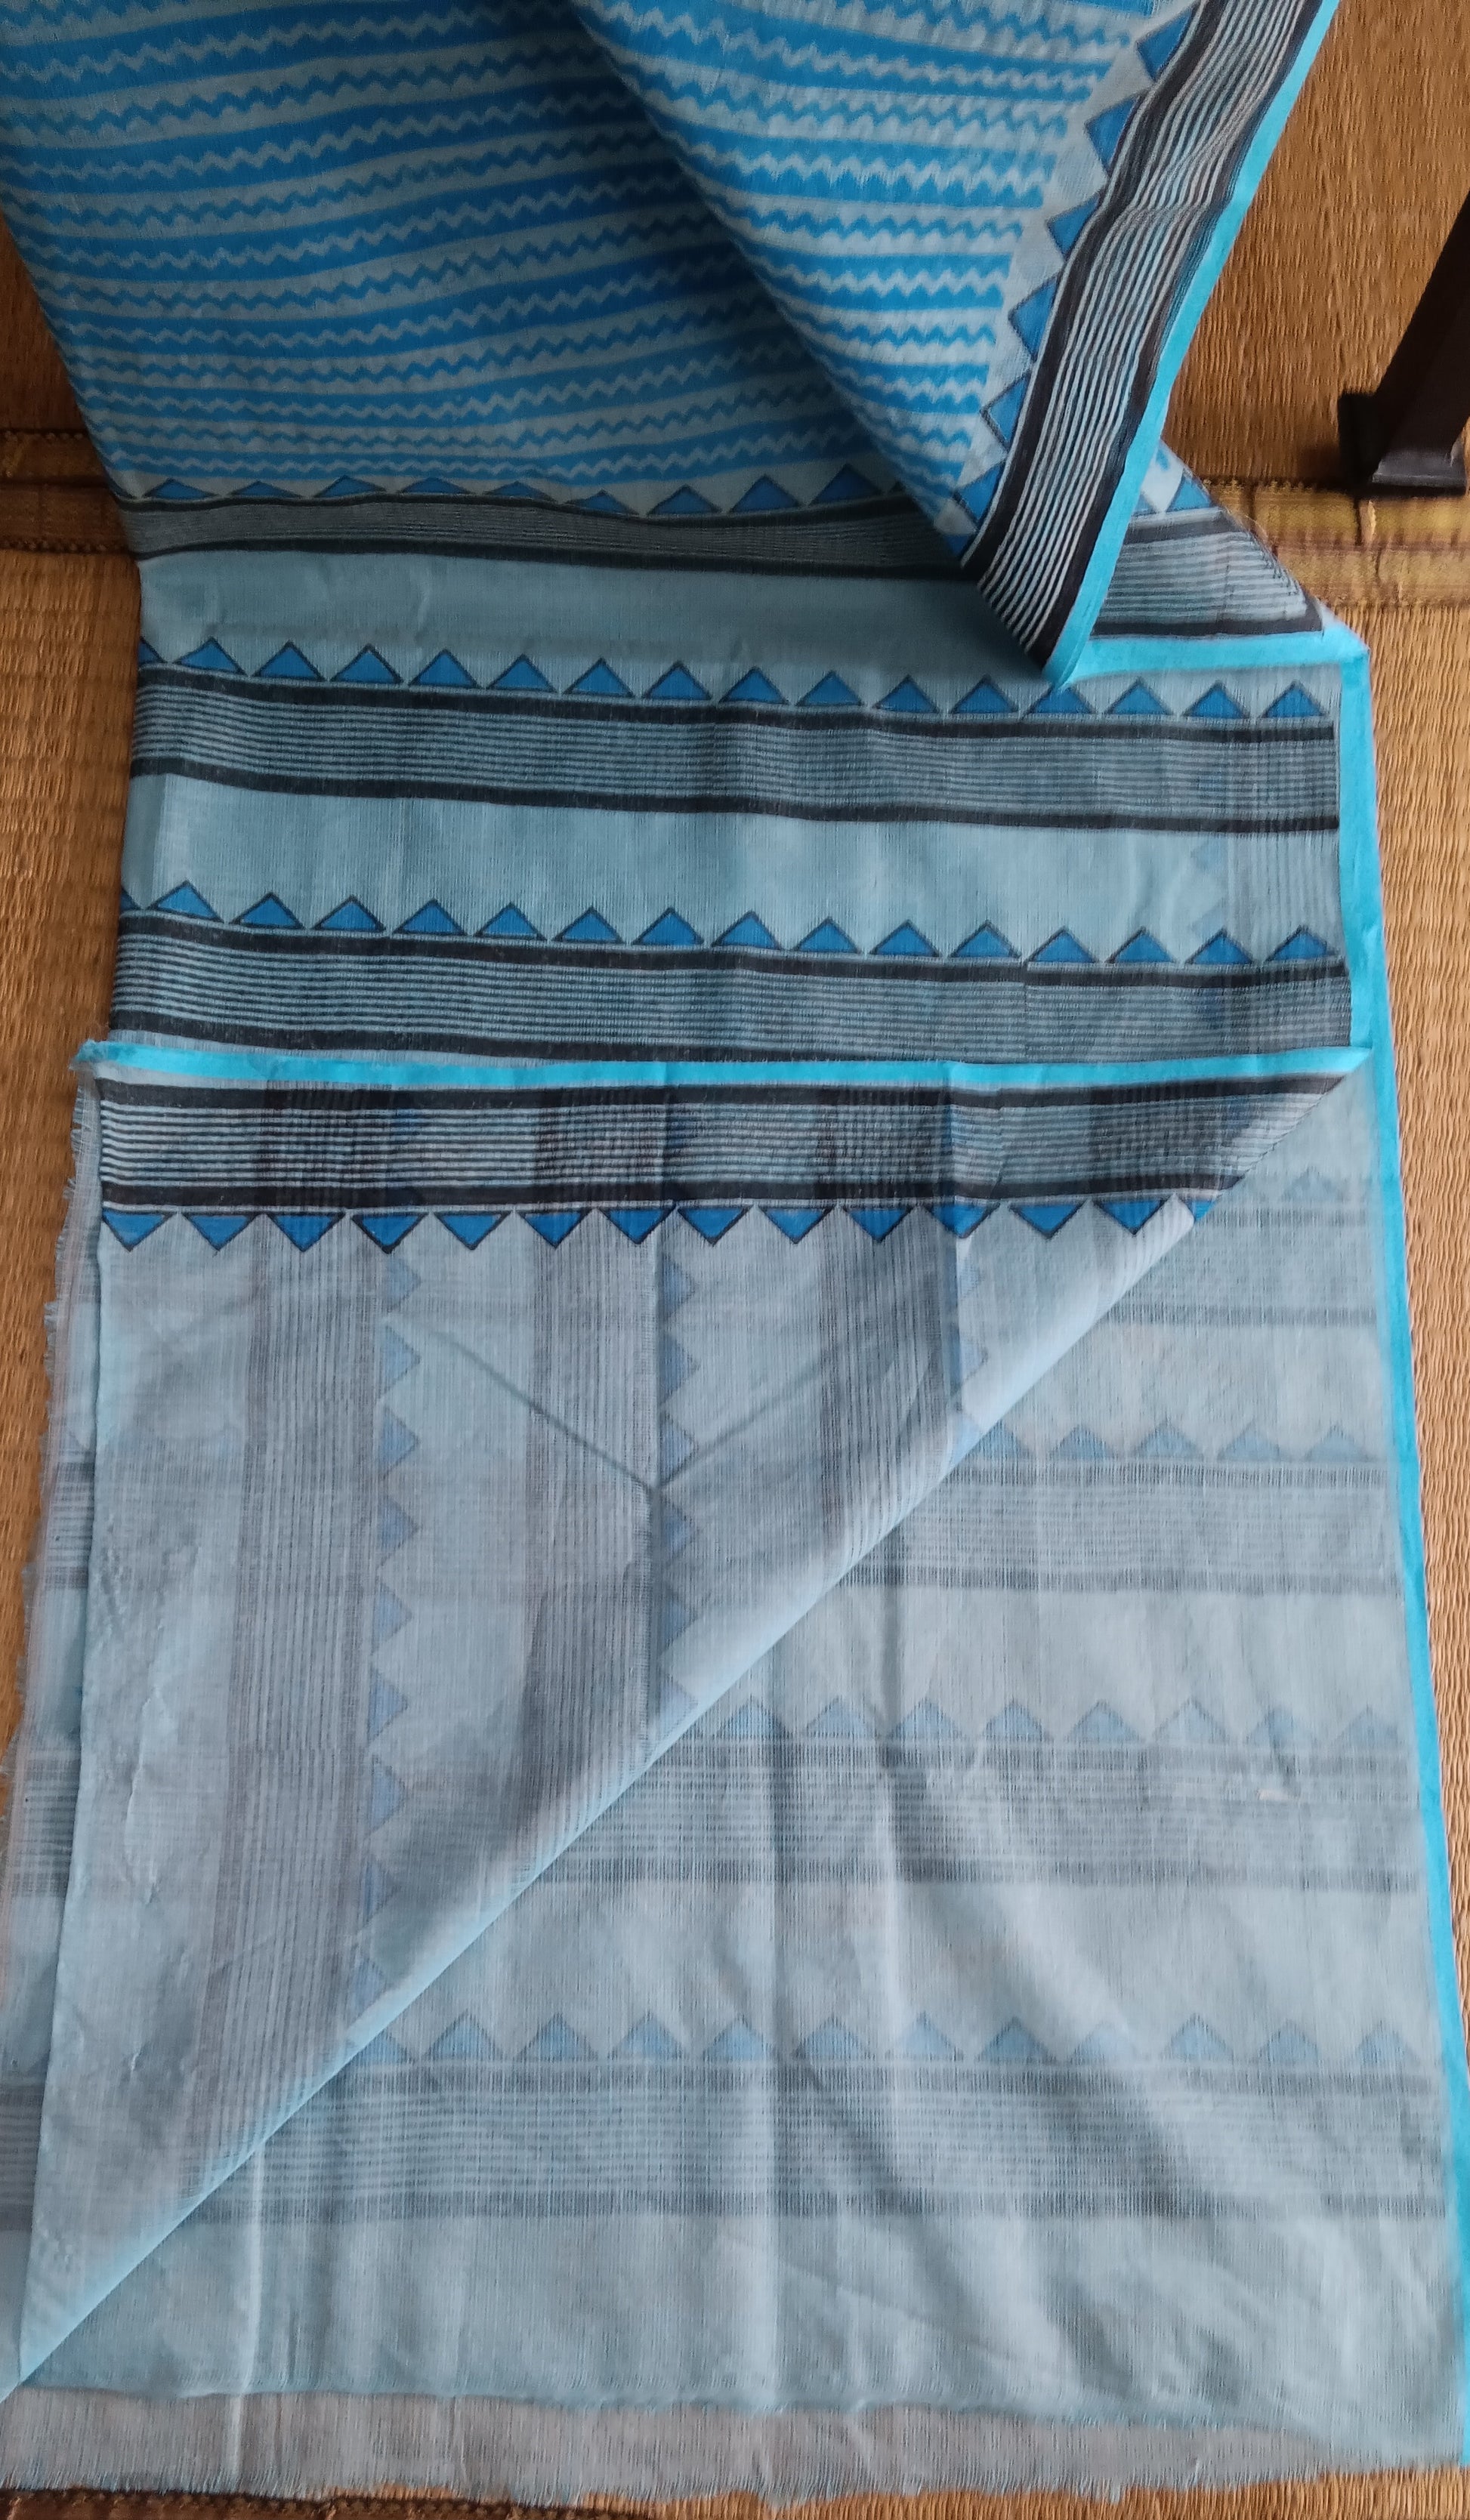 View from the top of the plain blue blouse of a daily wear kota cotton saree